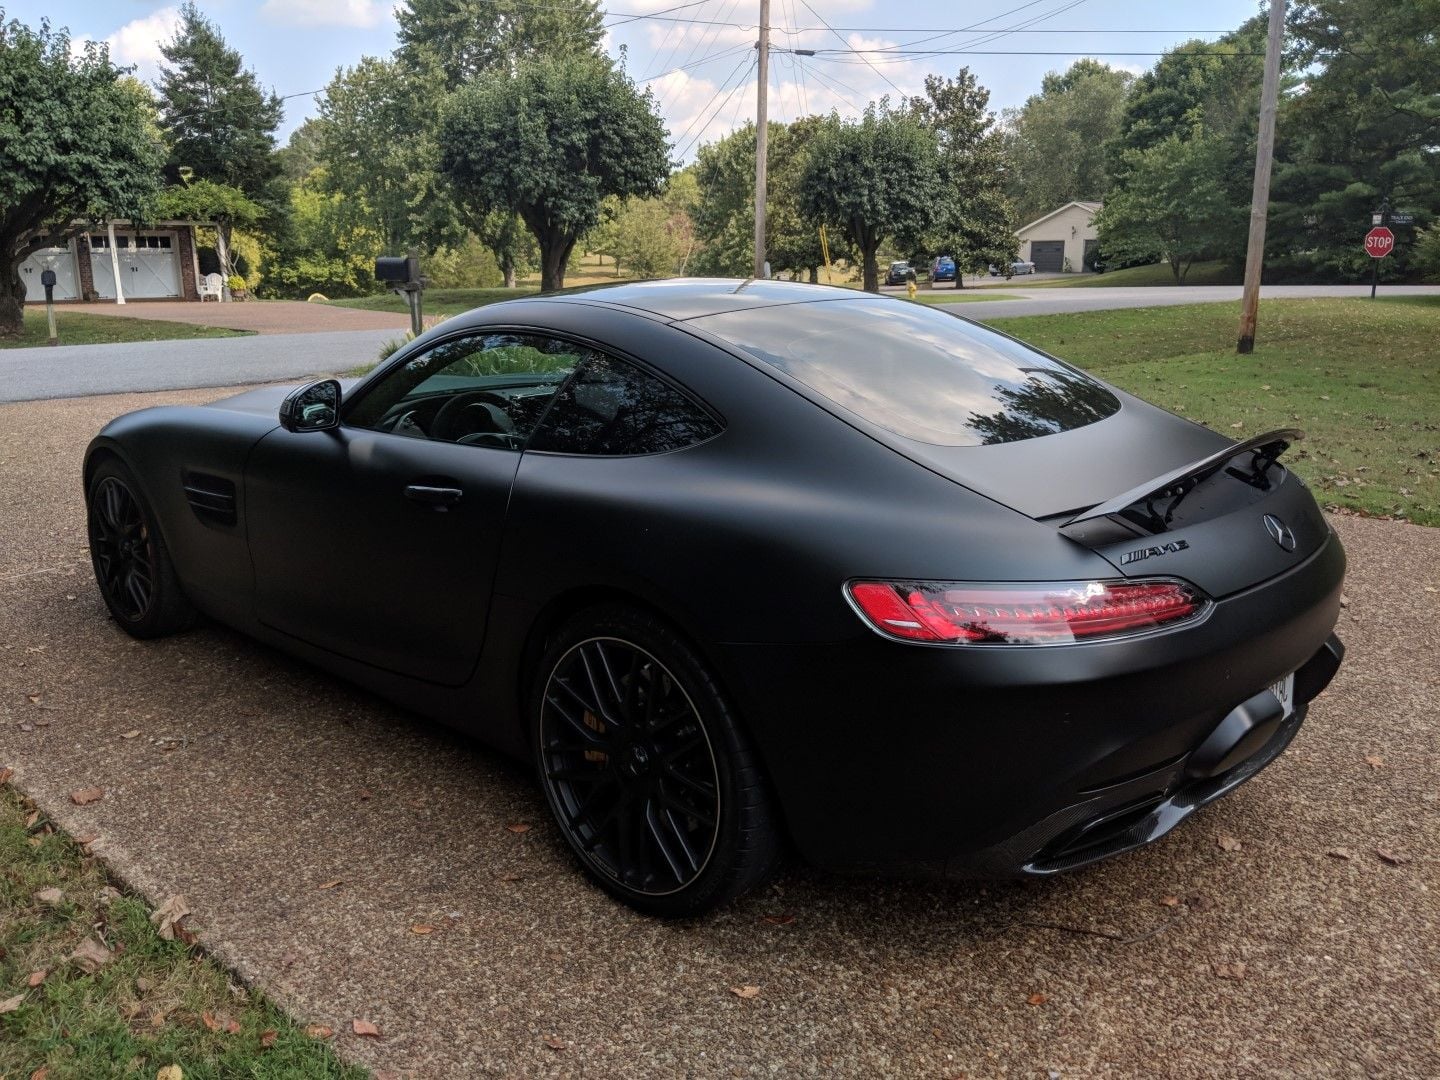 2016 Mercedes-Benz AMG GT S - 2016 AMG GTS with all options except CF engine cover and lane assist 8700mi 112k - Used - VIN WDDYJ7JA5GA007391 - 900 Miles - 8 cyl - 2WD - Automatic - Coupe - Black - Franklin, TN 37069, United States